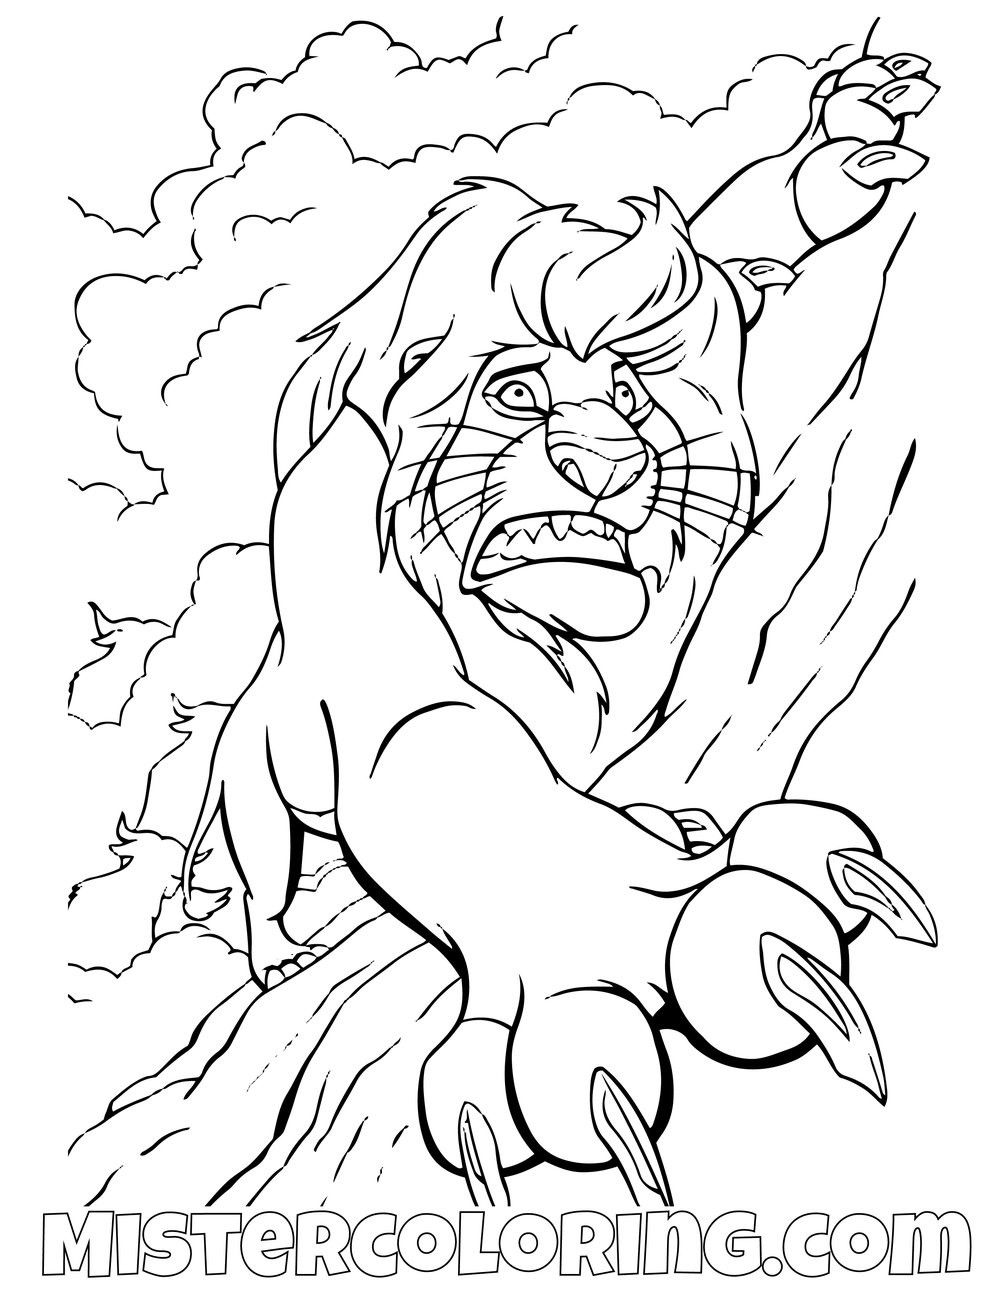 coloring : Lion King Coloring Pages Awesome The Lion King Coloring Pages  For Kids €� Mister Coloring Lion King Coloring Pages ~ queens